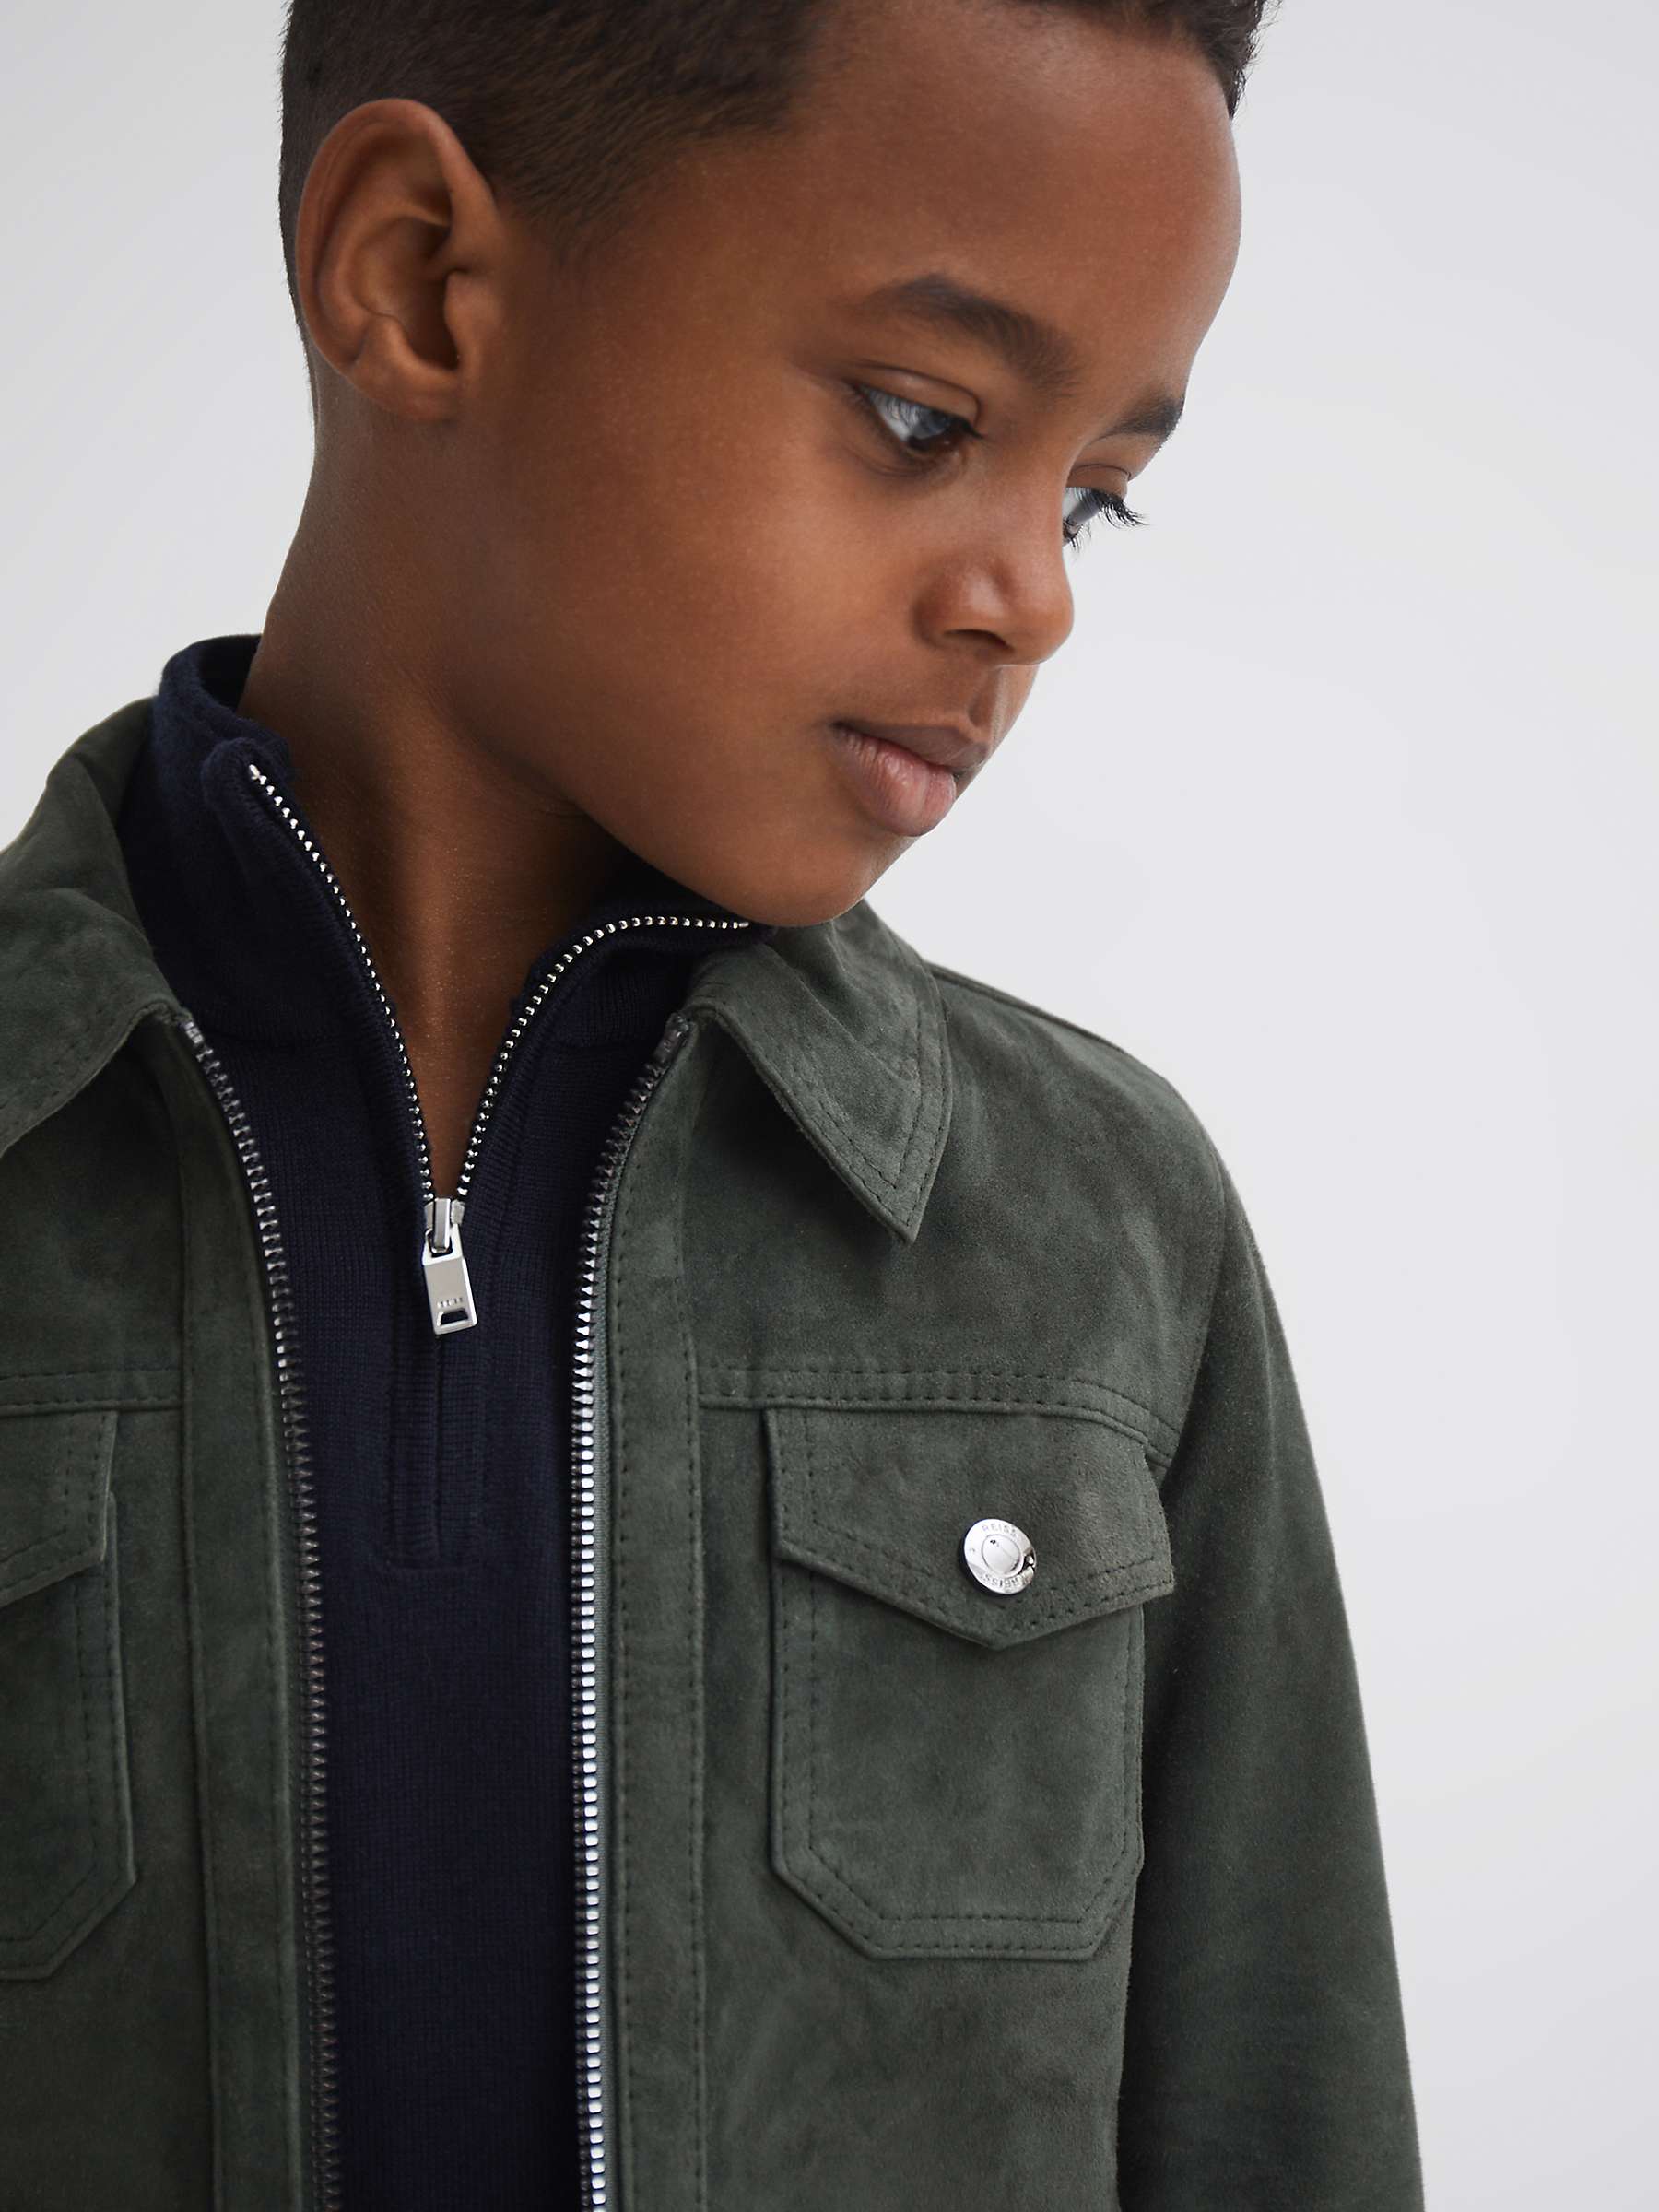 Buy Reiss Kids' Pike Suede Jacket, Forest Green Online at johnlewis.com